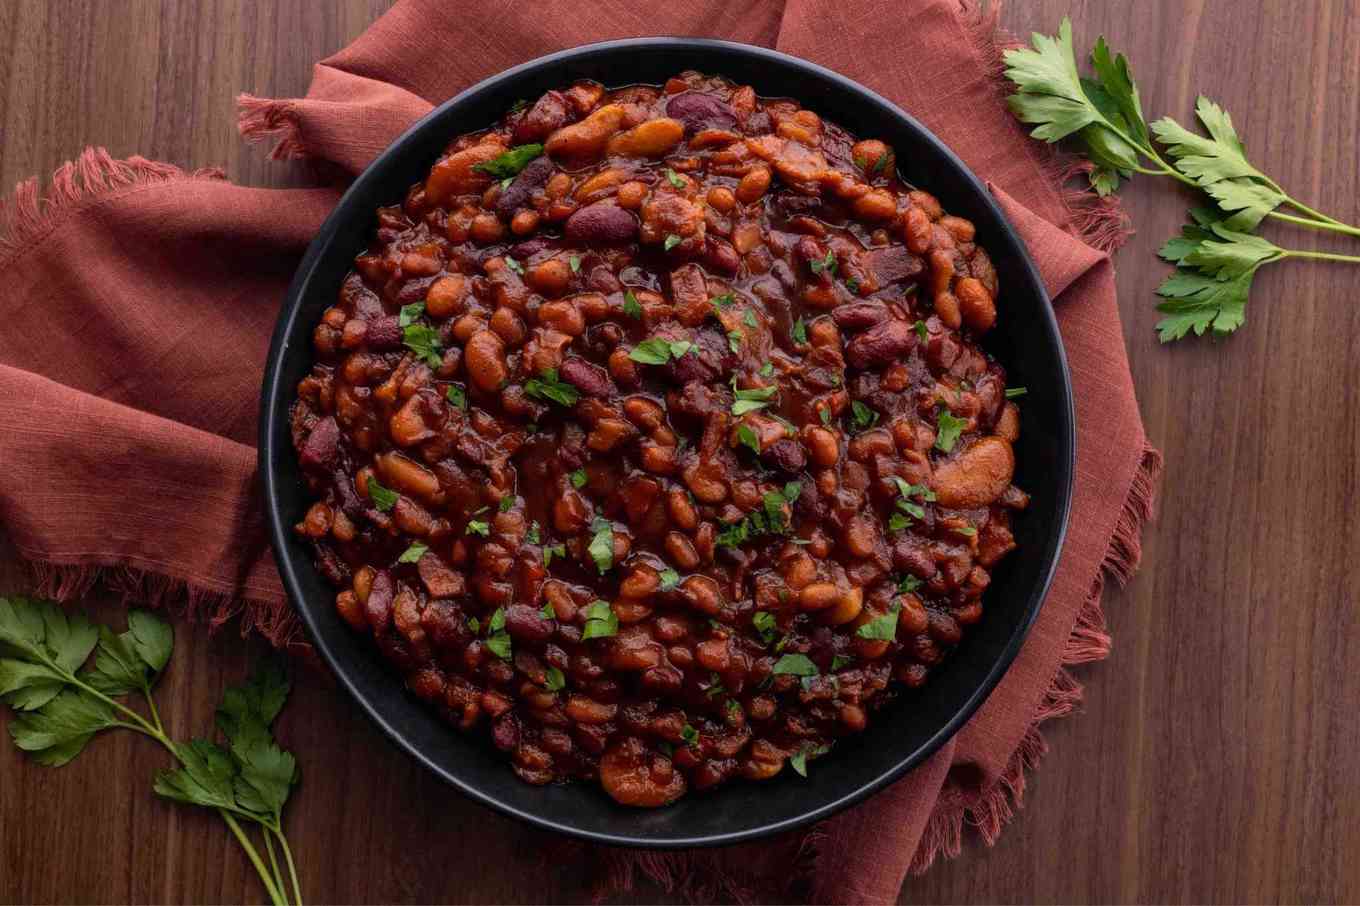 Baked Beans in serving bowl